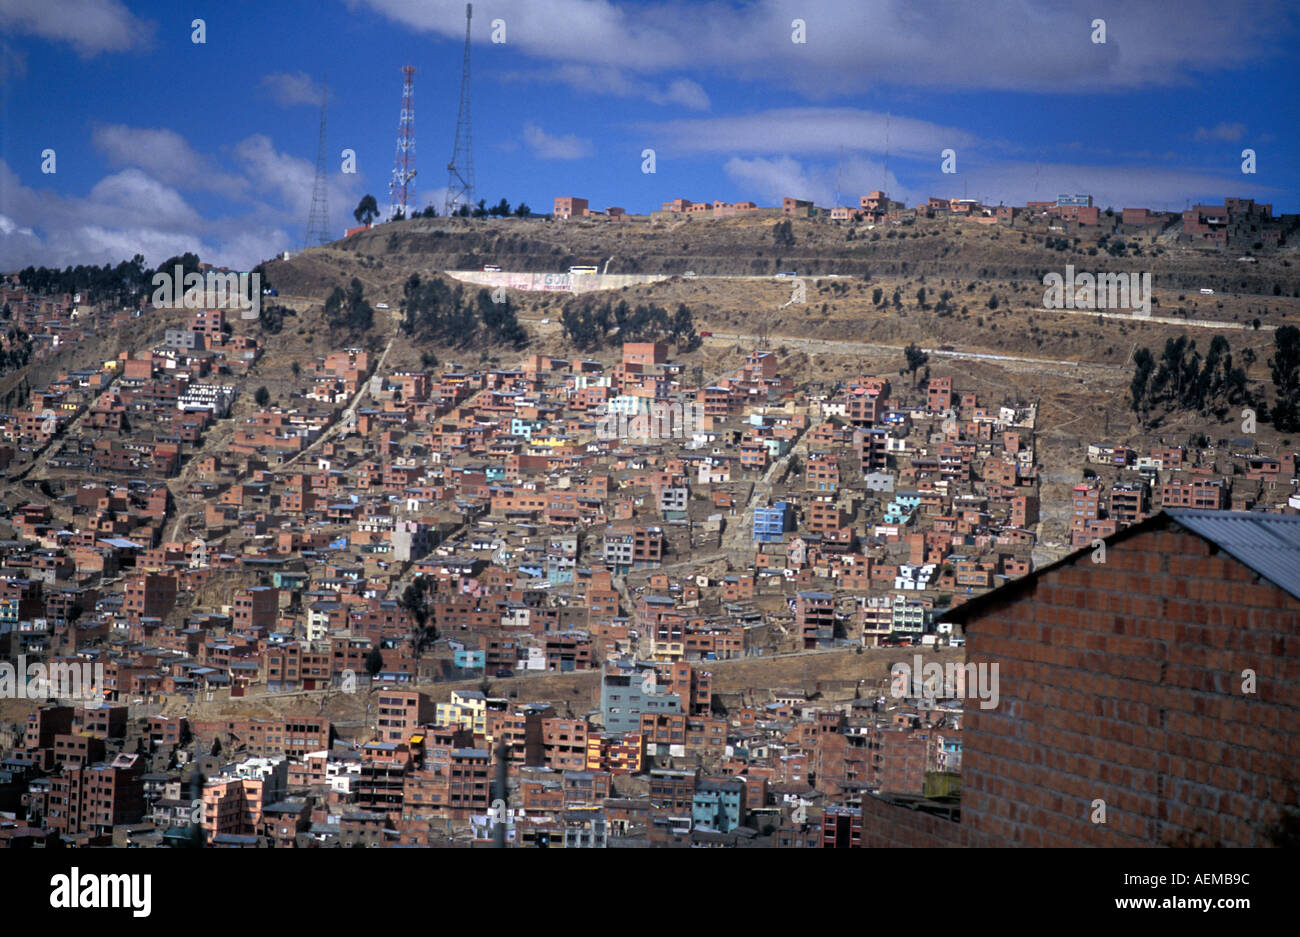 Suburbs of La Paz extend to the lower slopes of surrounding mountains Abodes of simple construction hug the hillsides Bolivia Stock Photo